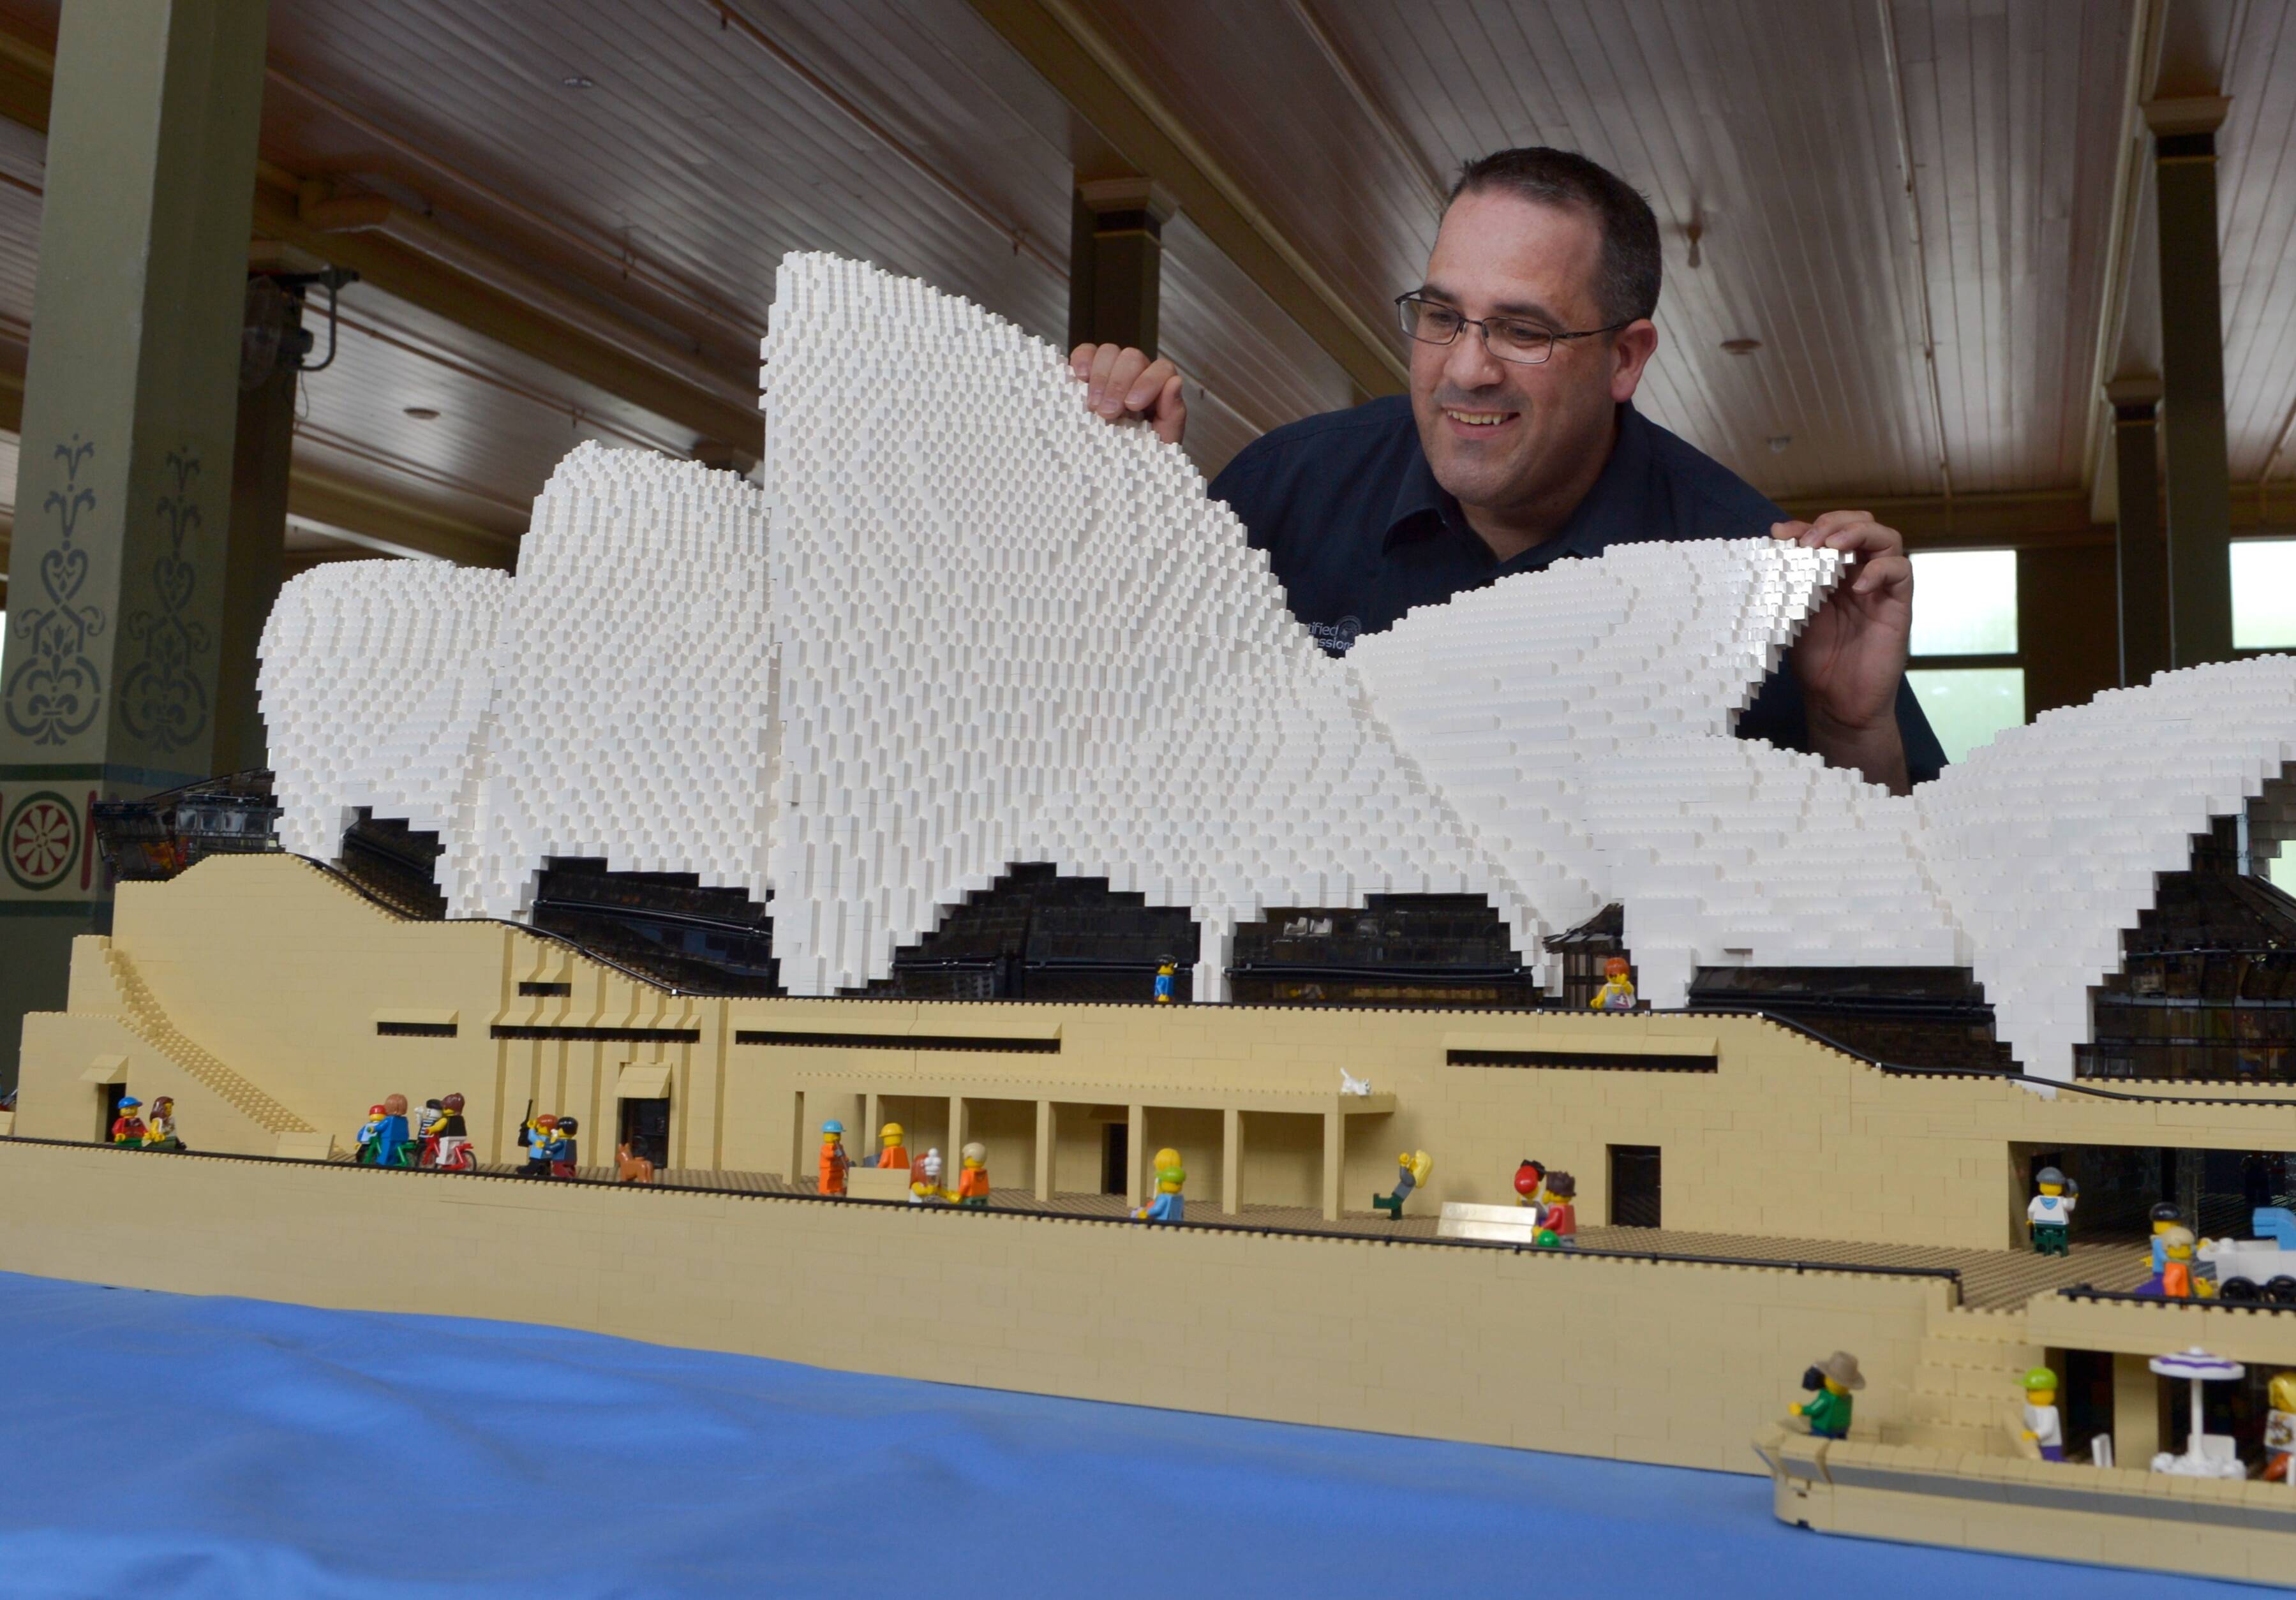 Mount - Wahluu to be built from LEGO | Advocate NSW